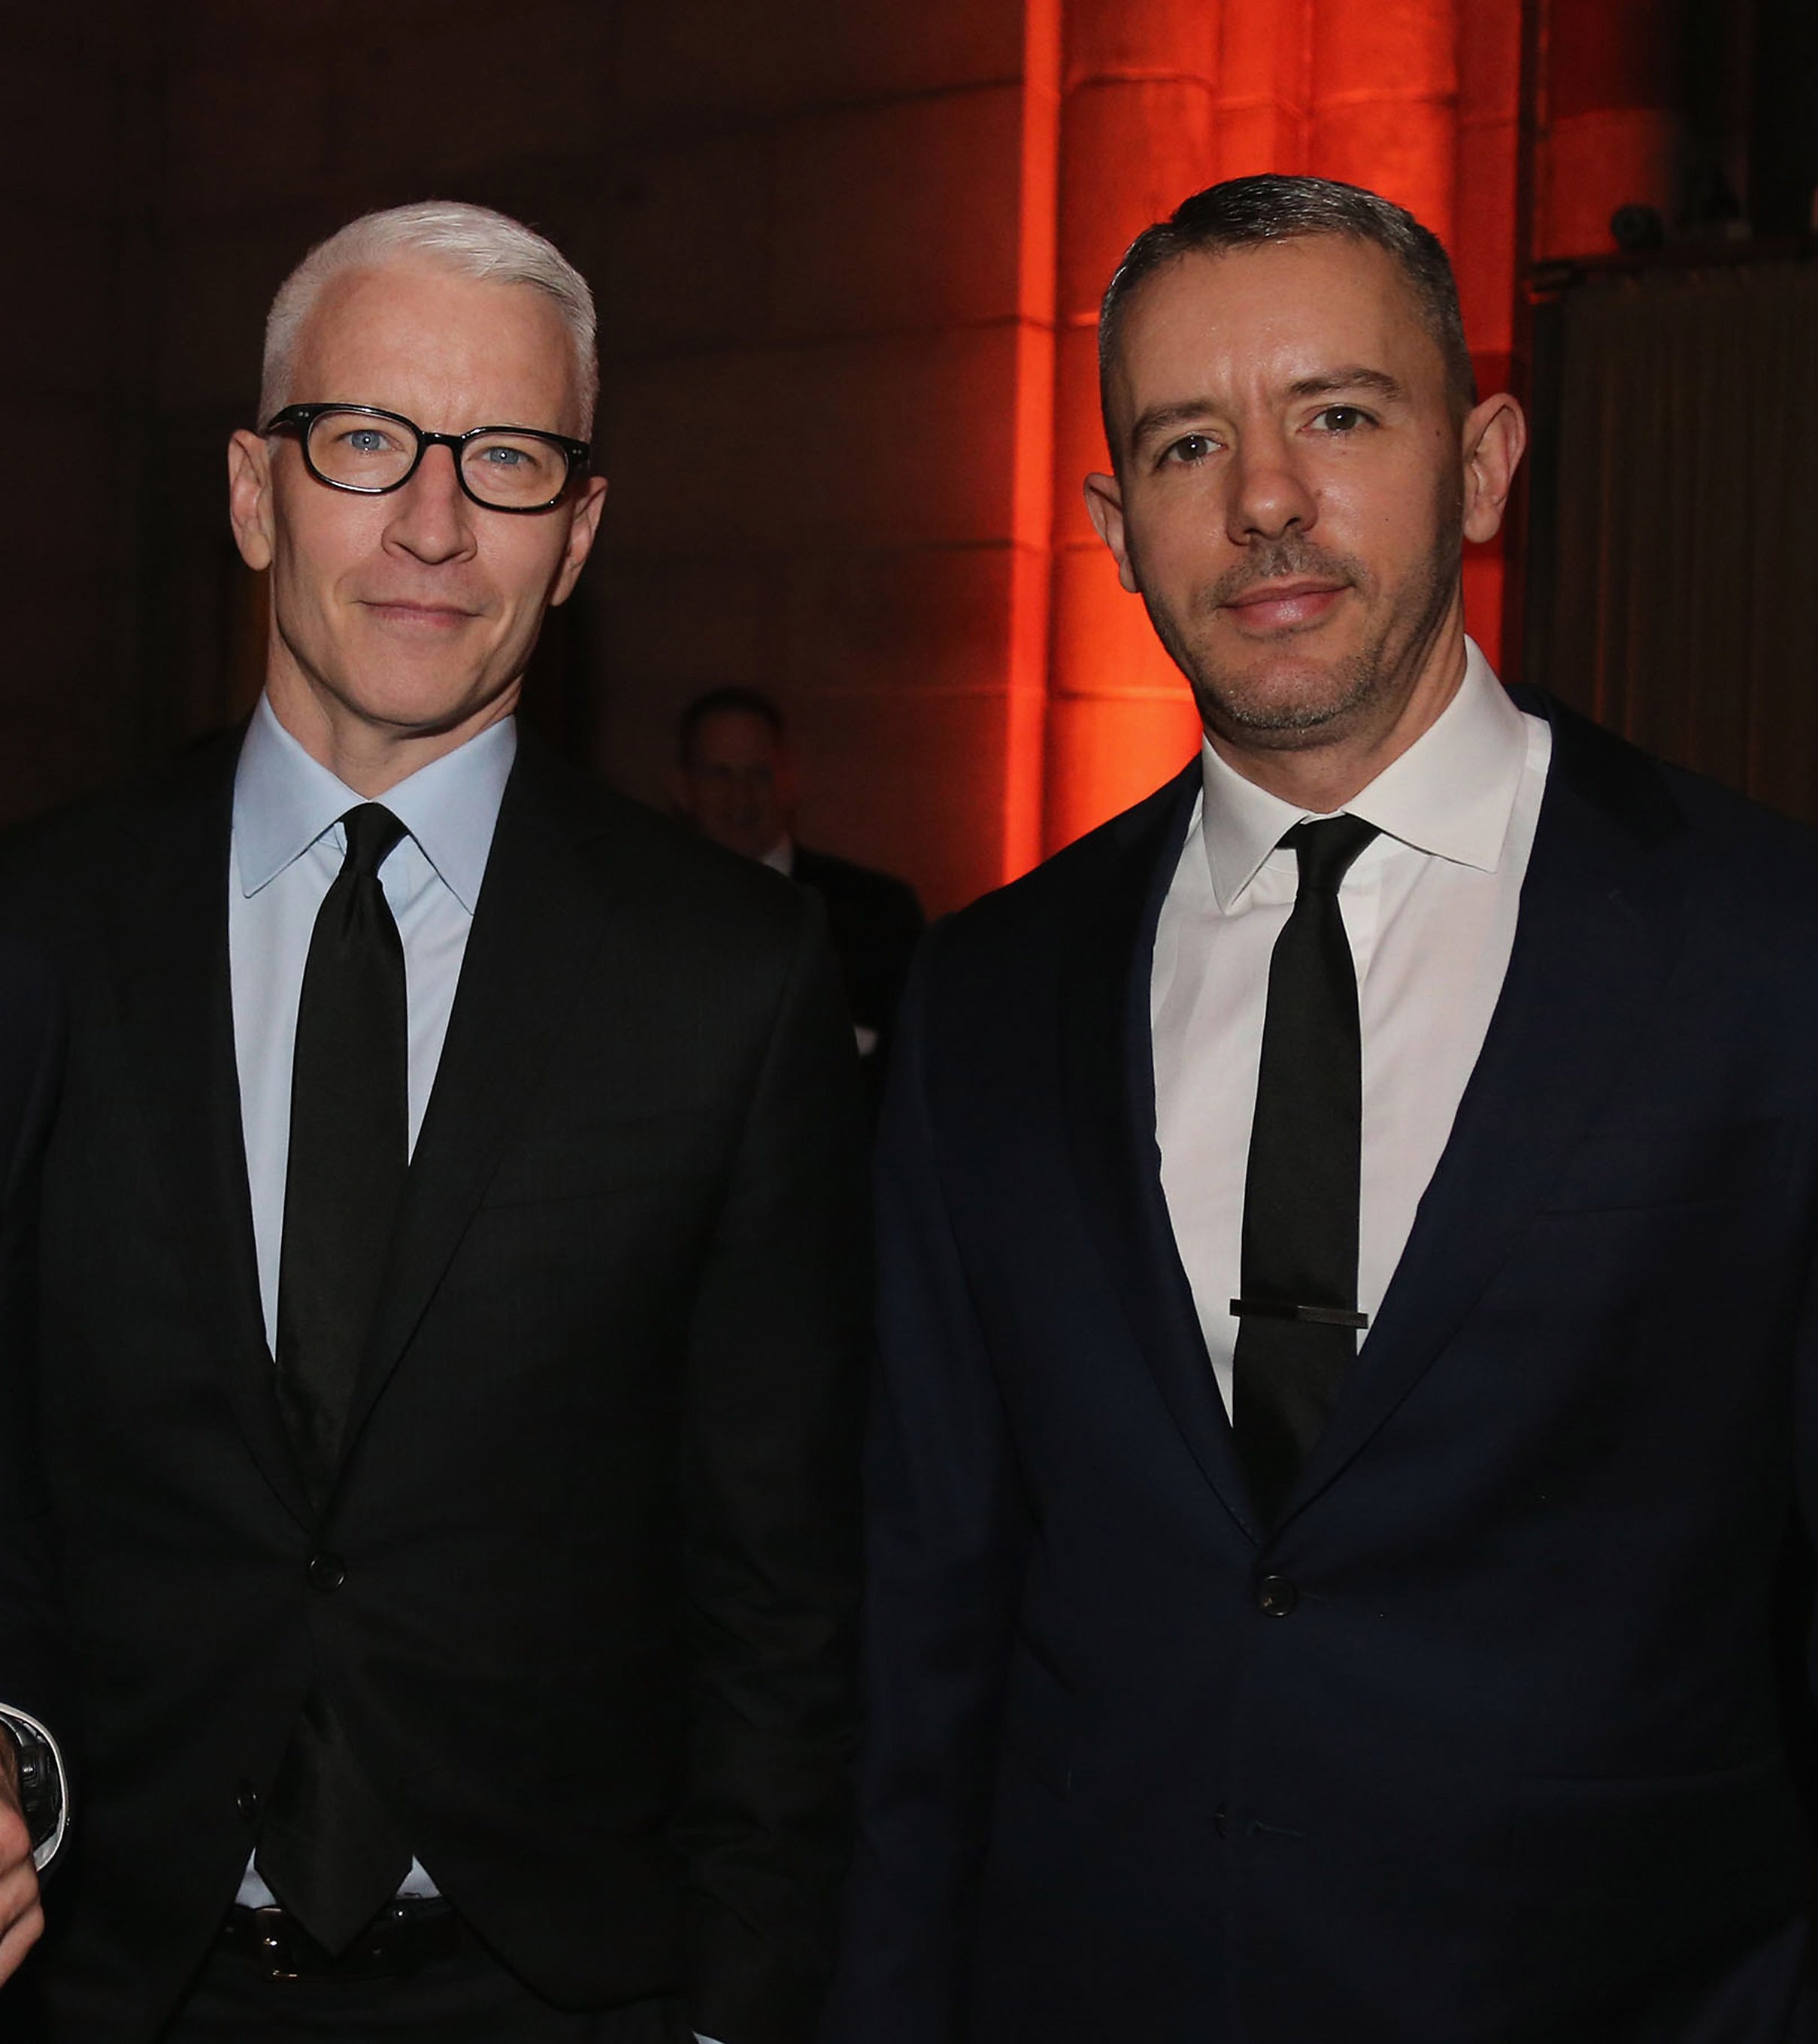 Anderson Cooper and Benjamin Maisani at the Windward School Benefit on March 10, 2018, in New York City | Source: Getty Images